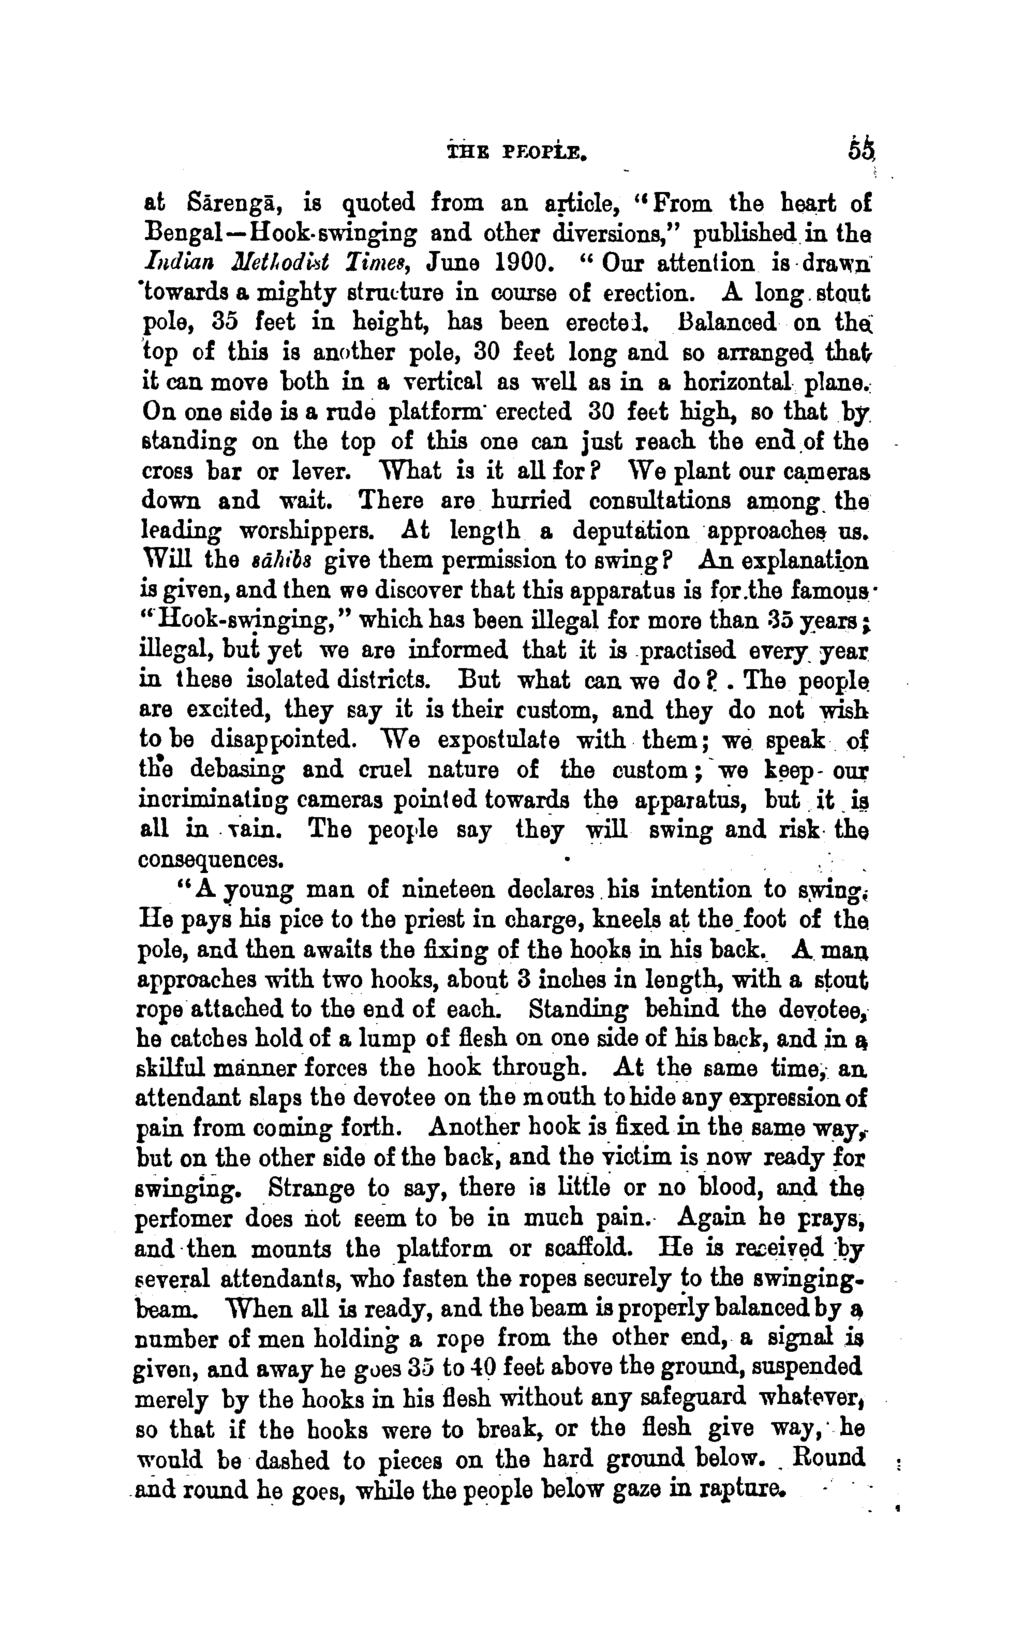 THE l'f.ol'le. at Sarenga, is quoted from an aj"f;icle, " From the heart of Bengal-Hook-swinging and other diversions," published in the Iitdian Jlet!.odi.st Times, June 1900.